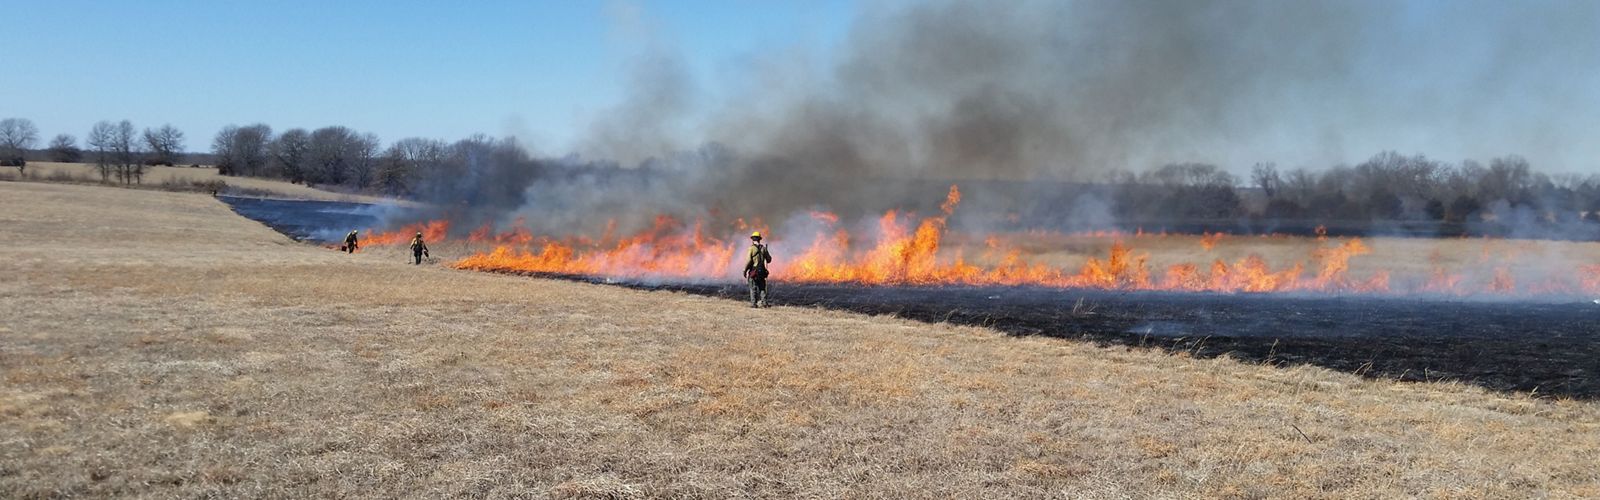 Long line of fire moving across a prairie field with firefighters watching.